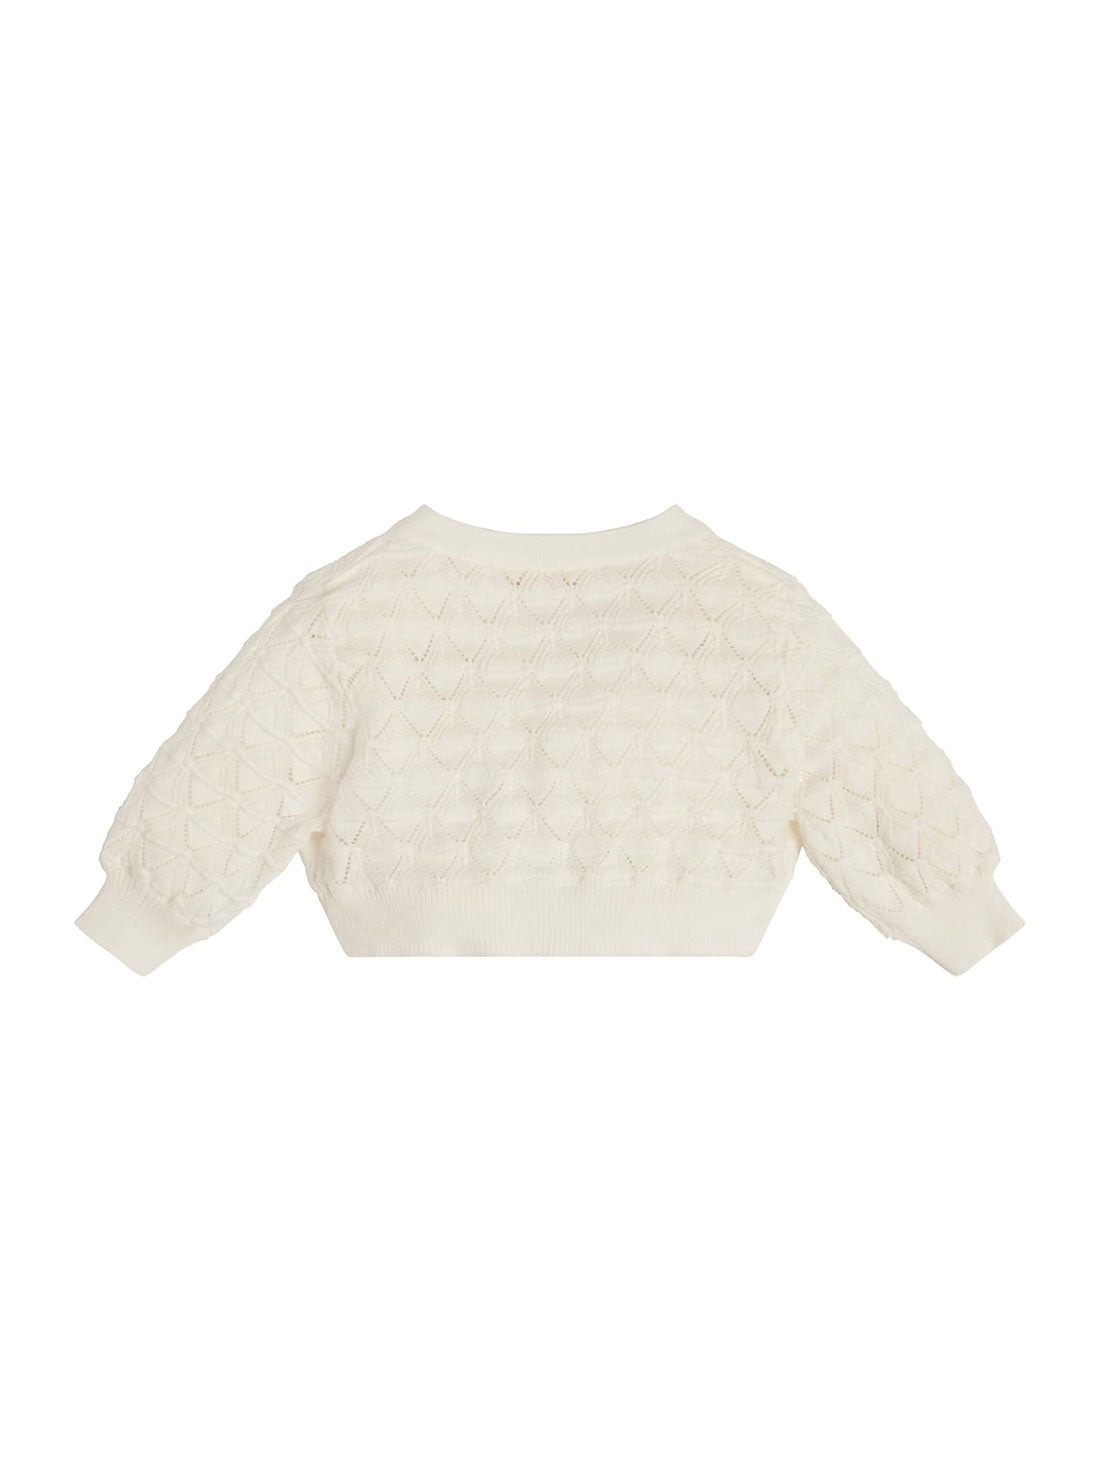 Eco White Knit Cardigan | GUESS Kids | Back view